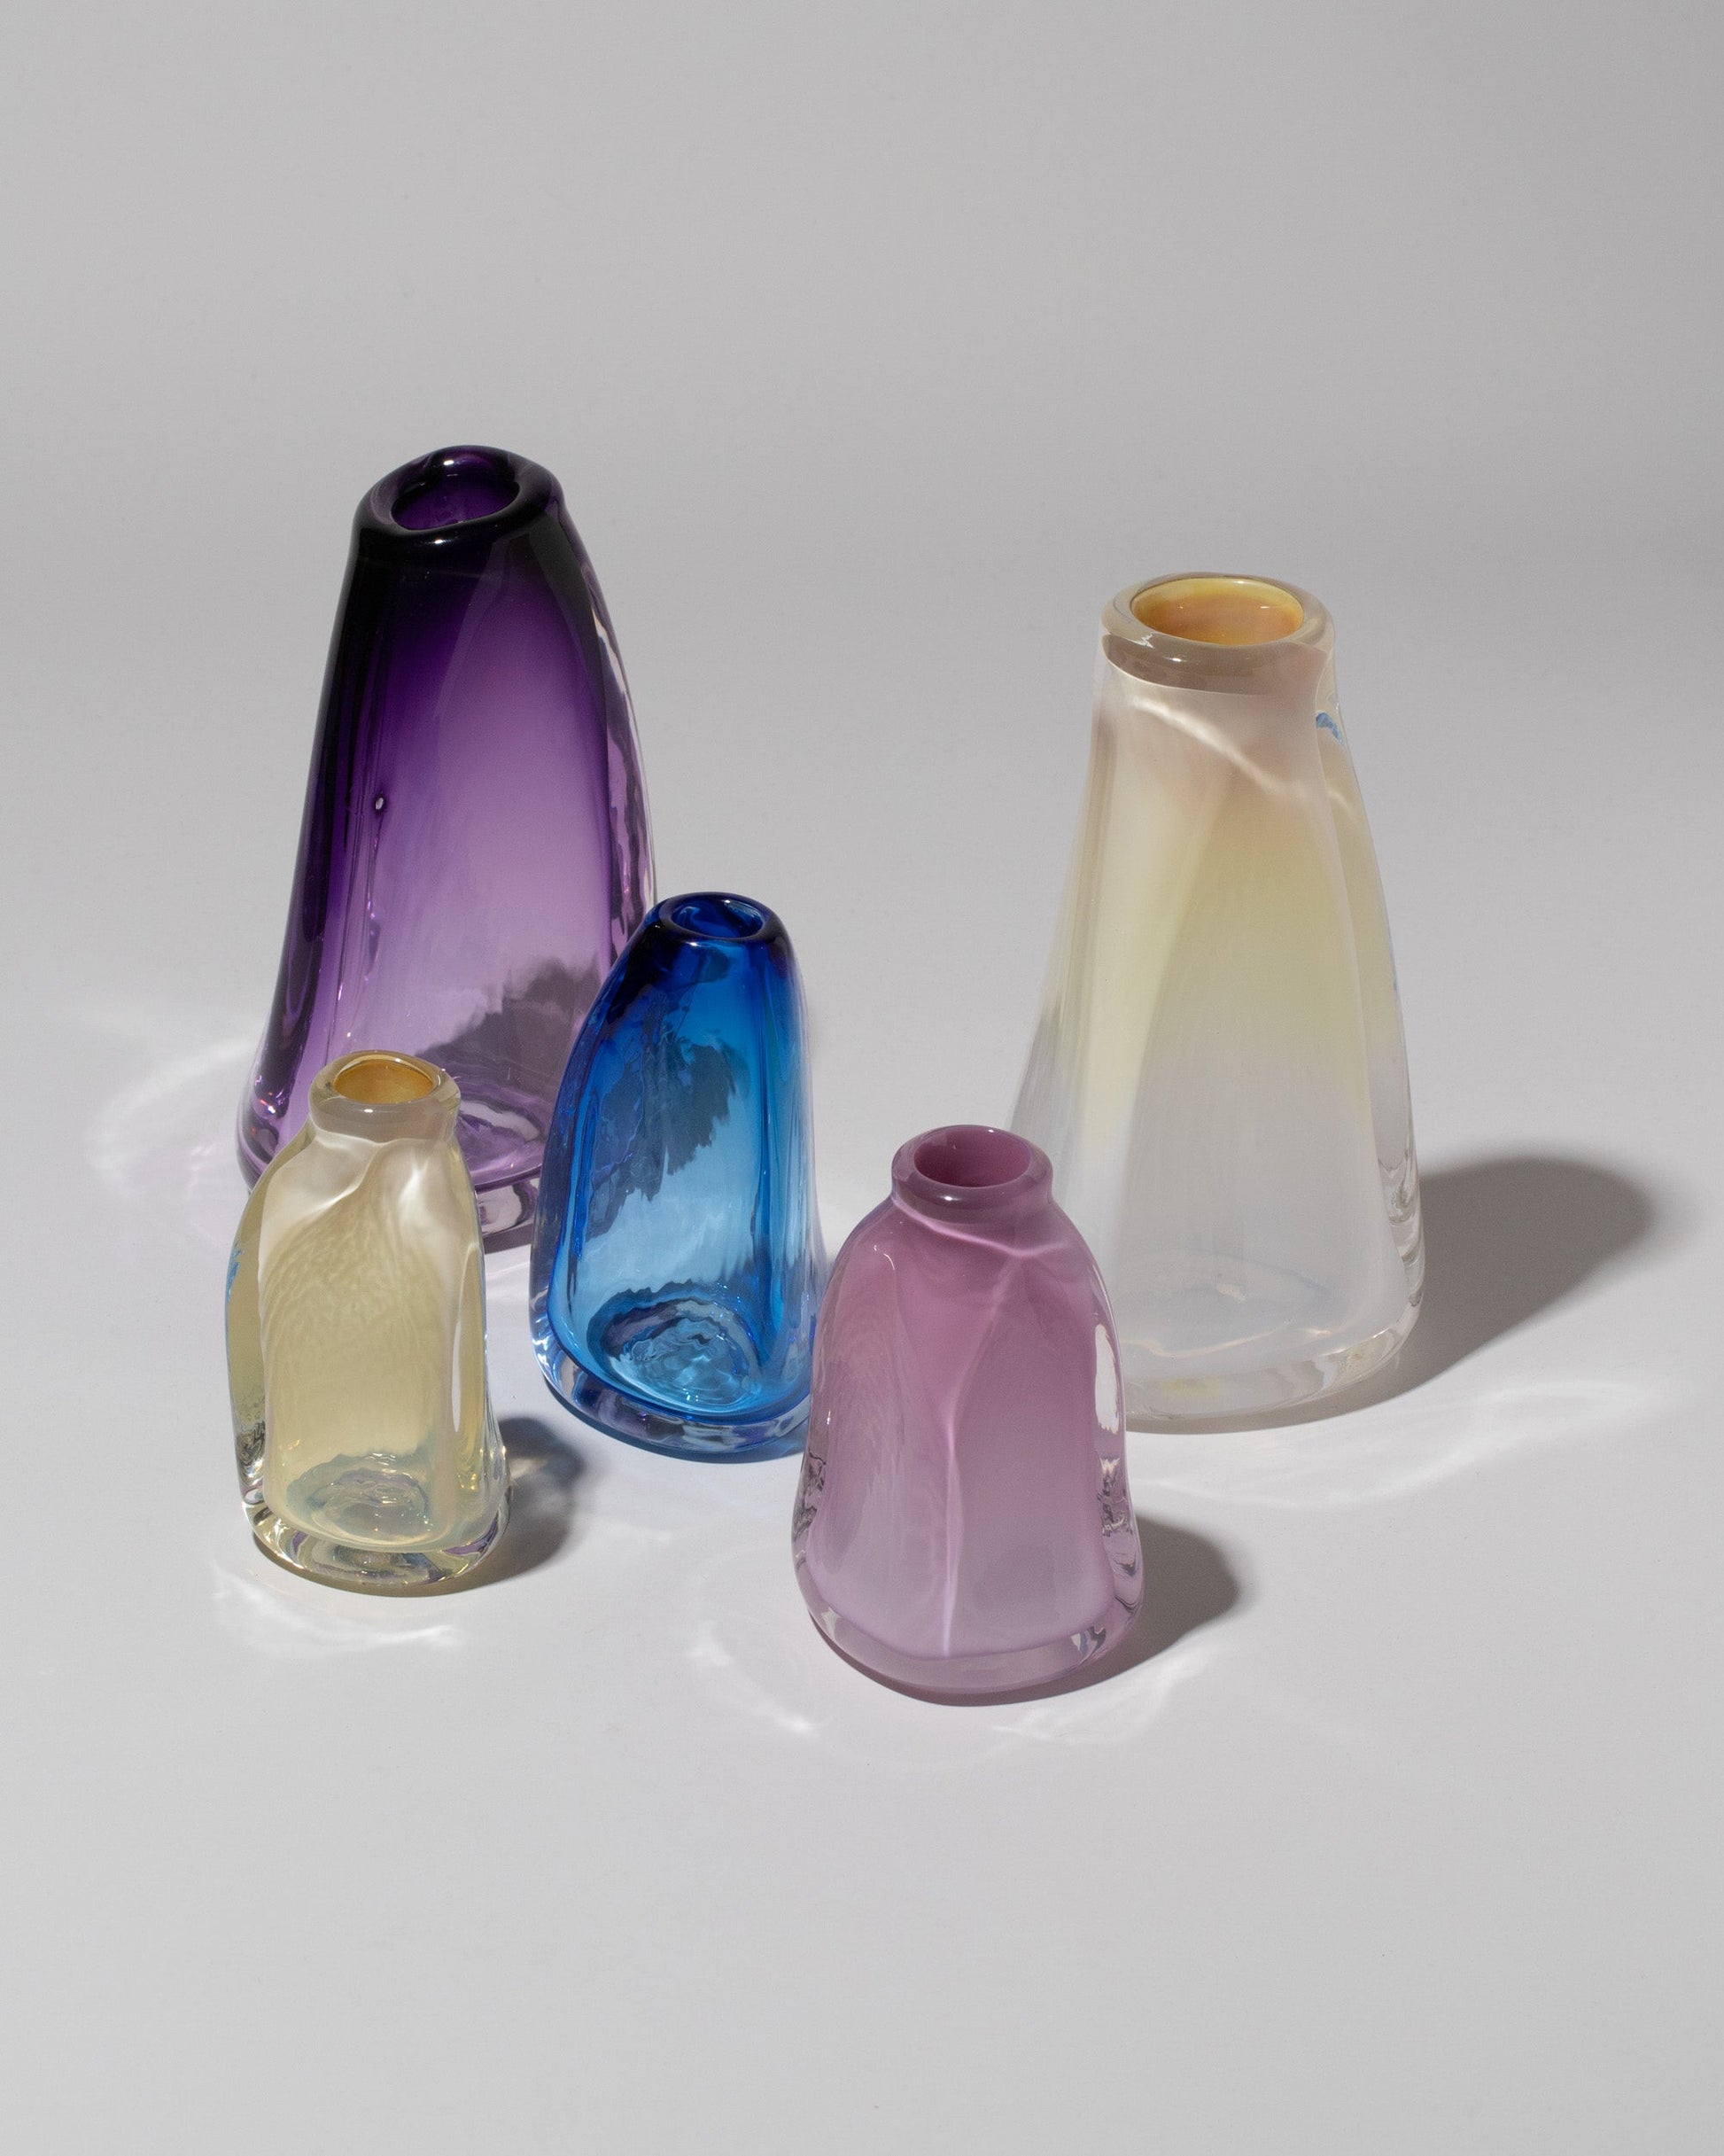 Group of BaleFire Glass Small Lilac, Small Egyptian Blue, Small Vanilla, Large Vanilla and Large Amethyst Suspension Vases on light color background.